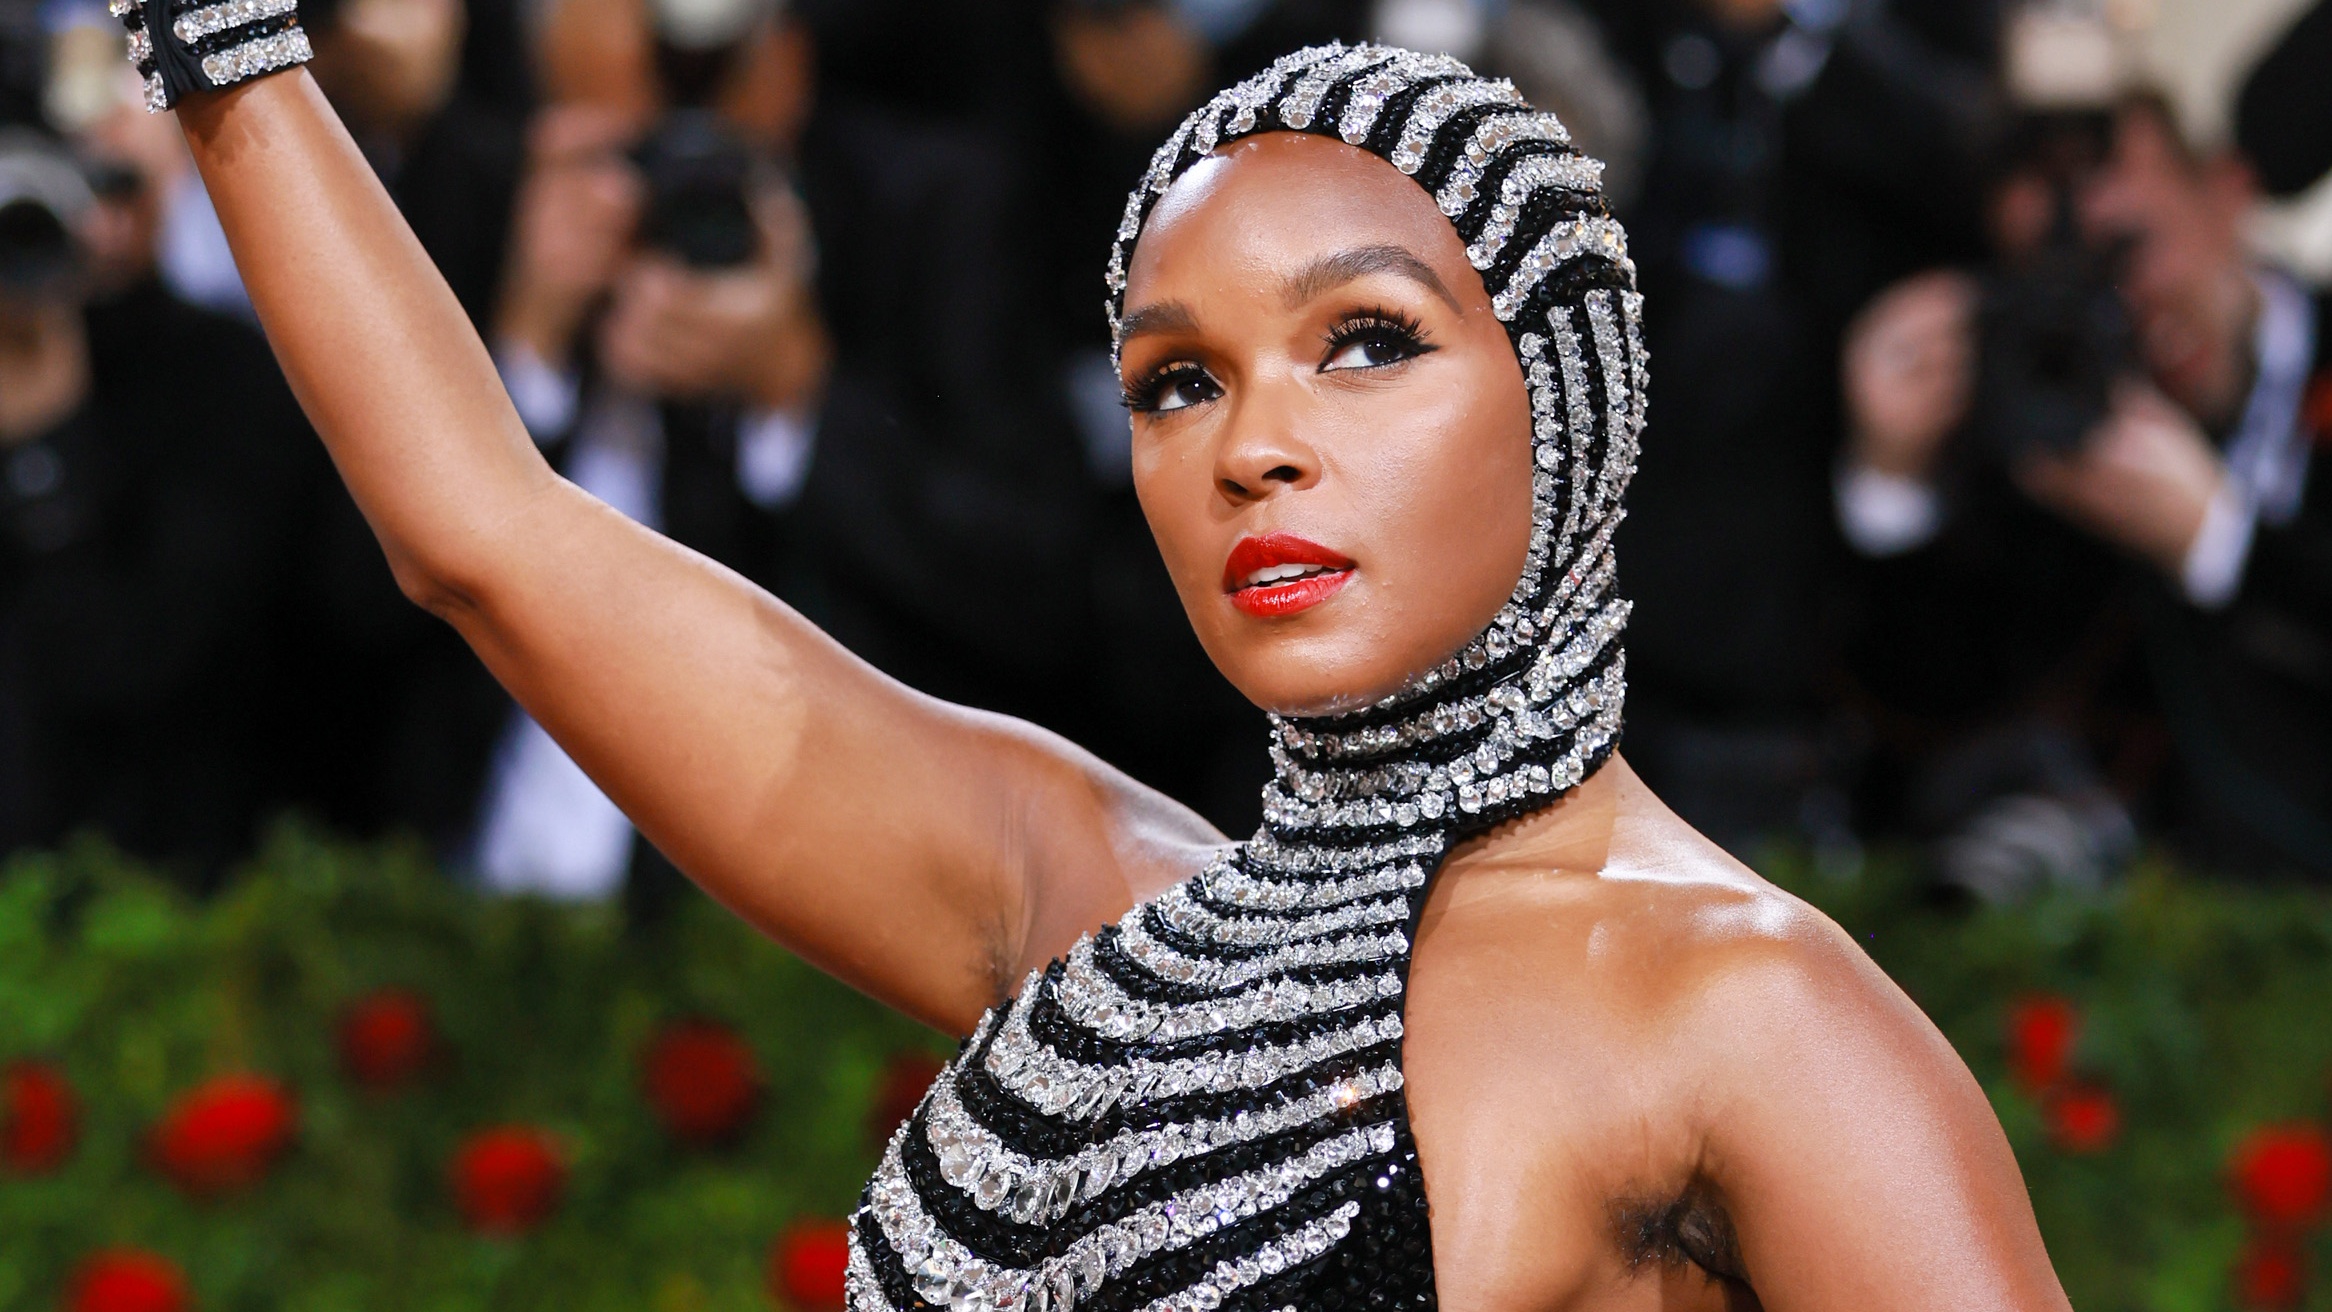 Janelle Monae Gives A Nod To The Future For Their 2022 MET Gala Look